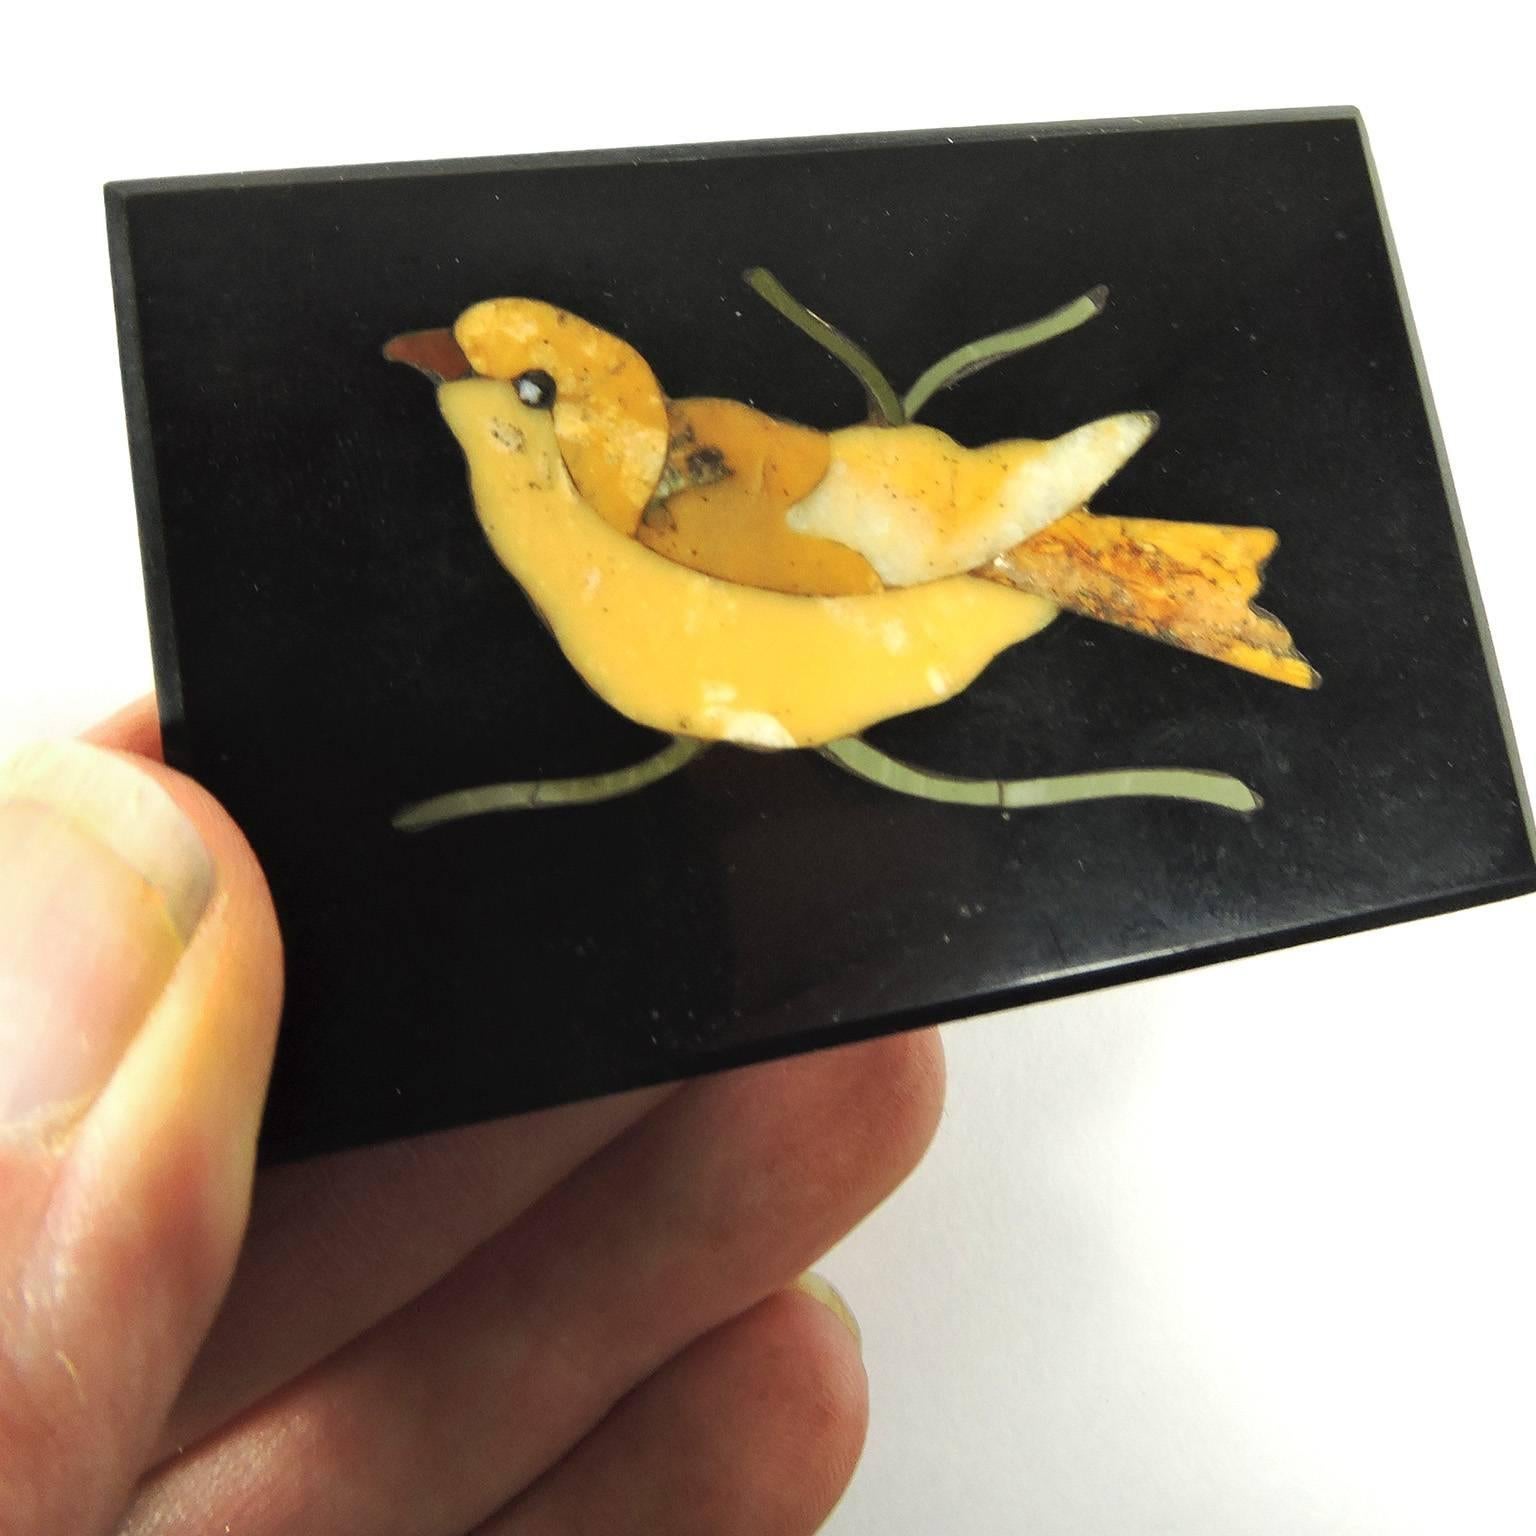 Miniature Italian Pietra Dura bird mosiac tile, onyx marble tile inlaid with sienna and rouge marble with green onyx, numbered on verso 